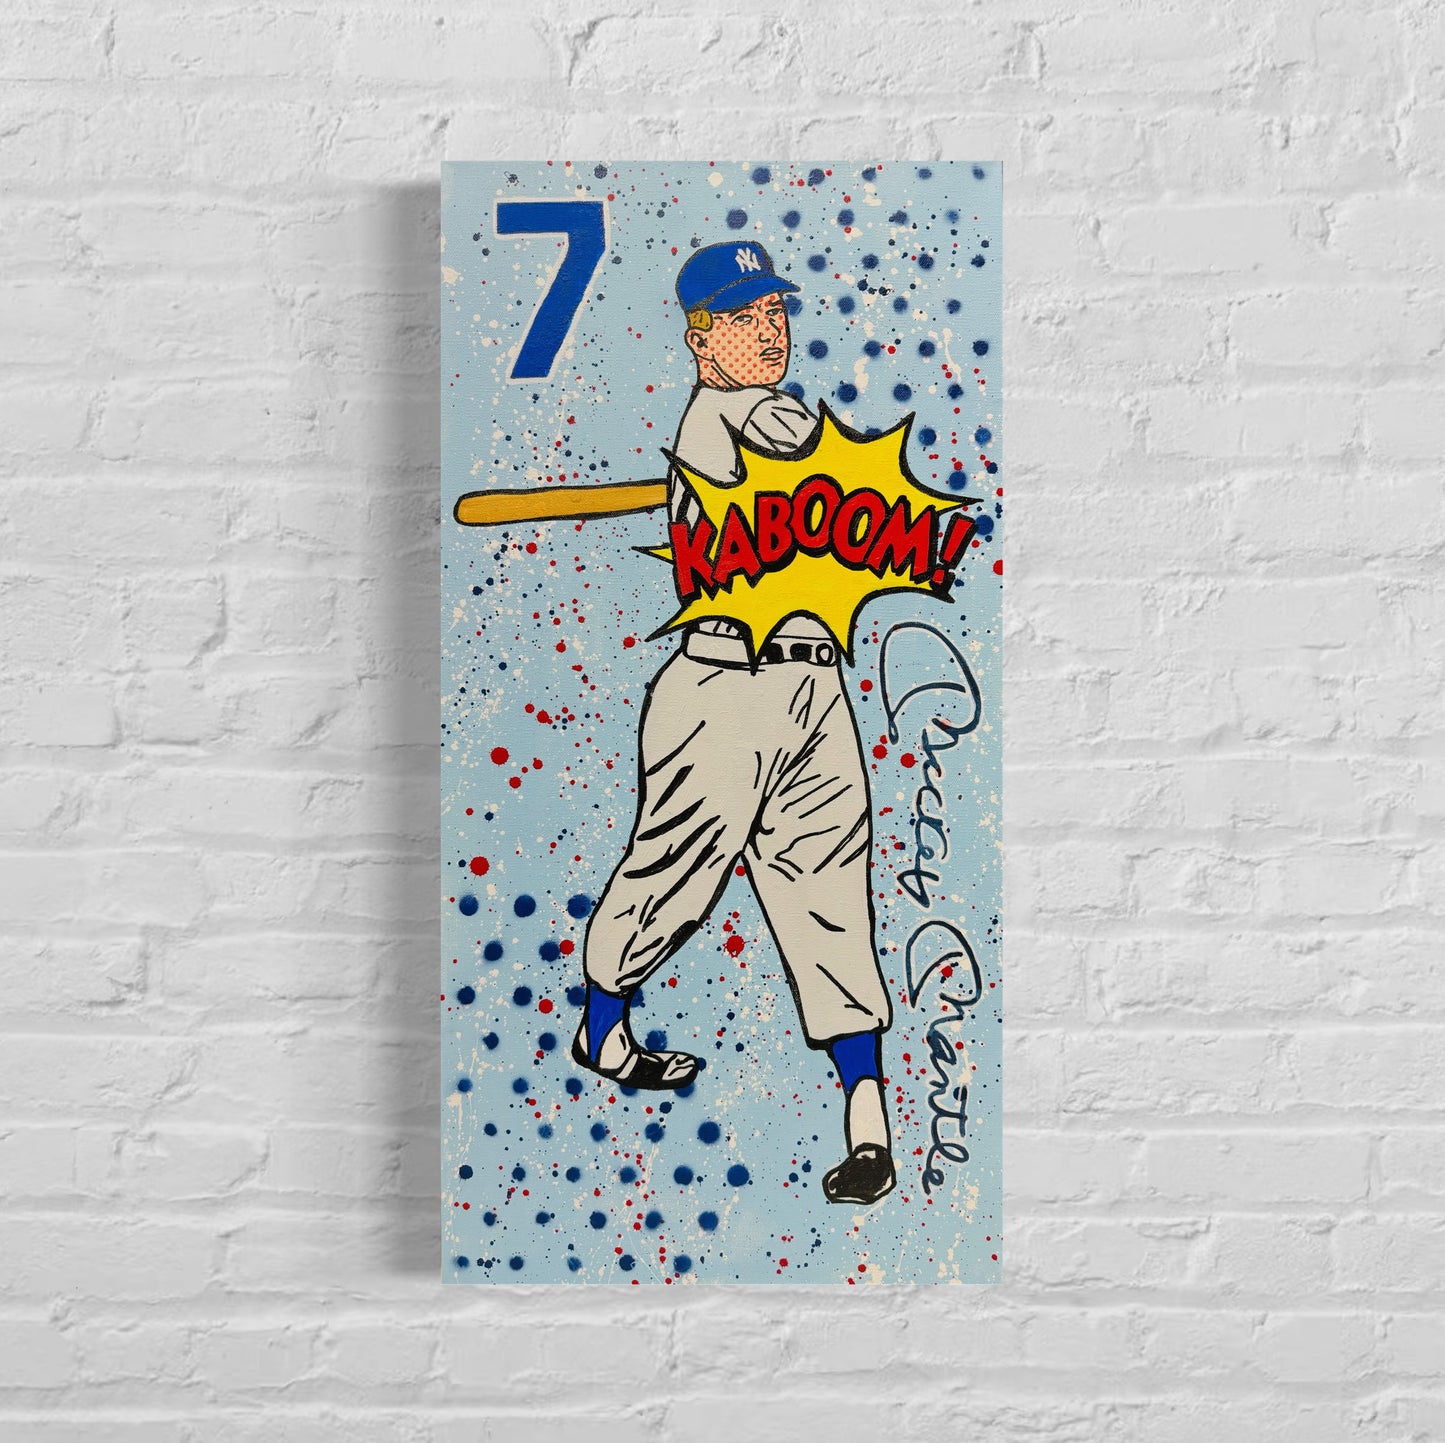 Mickey Mantle (KABOOM) 12x24x1.25in Canvas Print